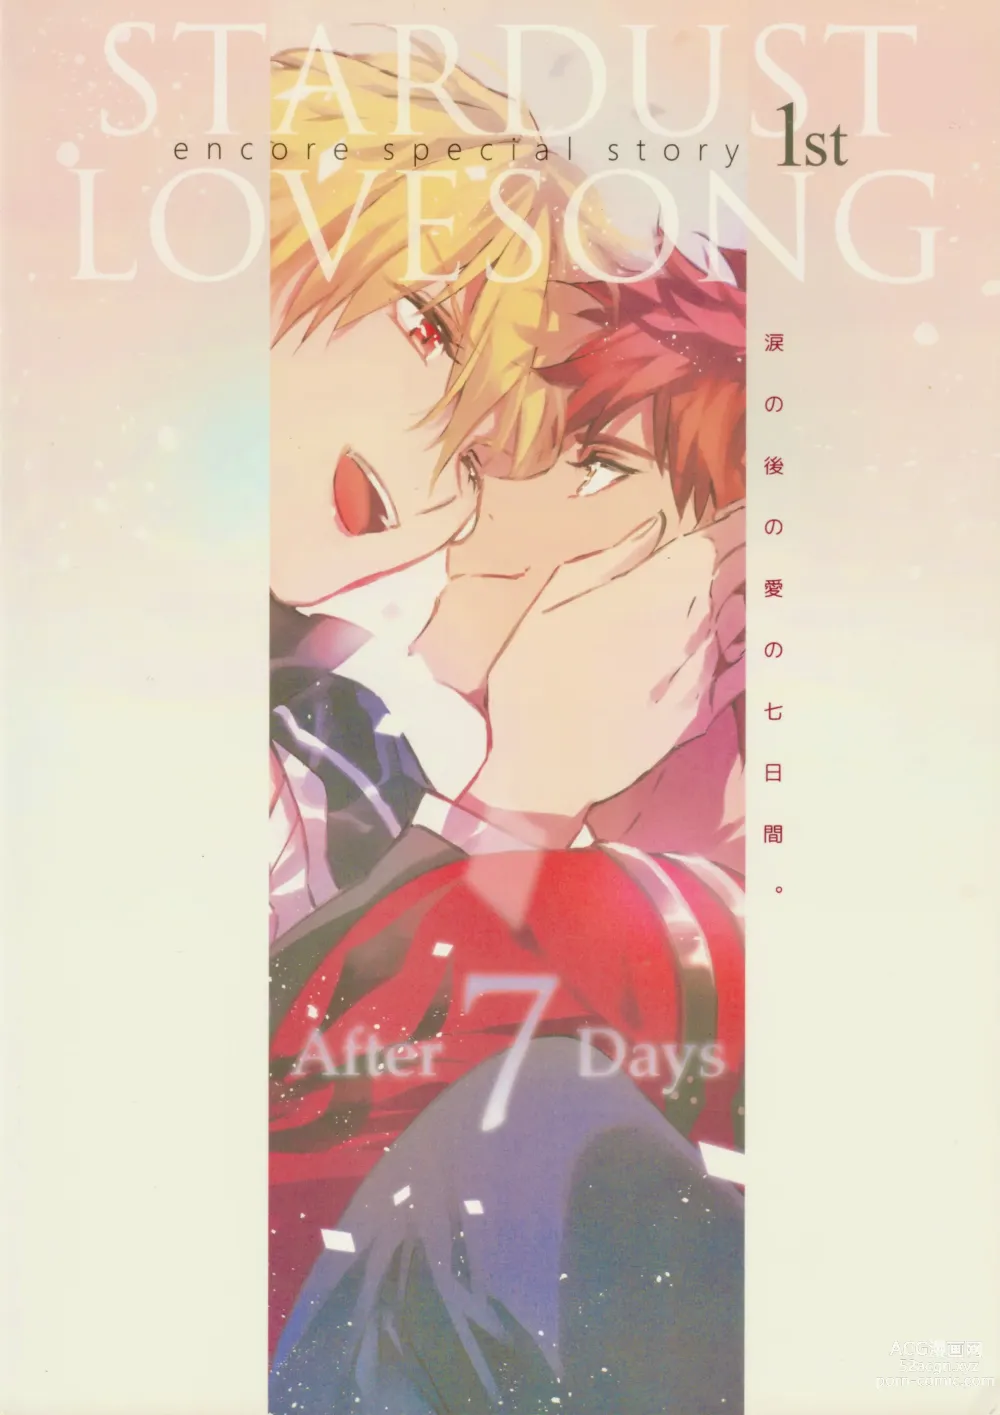 Page 60 of doujinshi STARDUST LOVESONG encore special story 1st After 7 Days